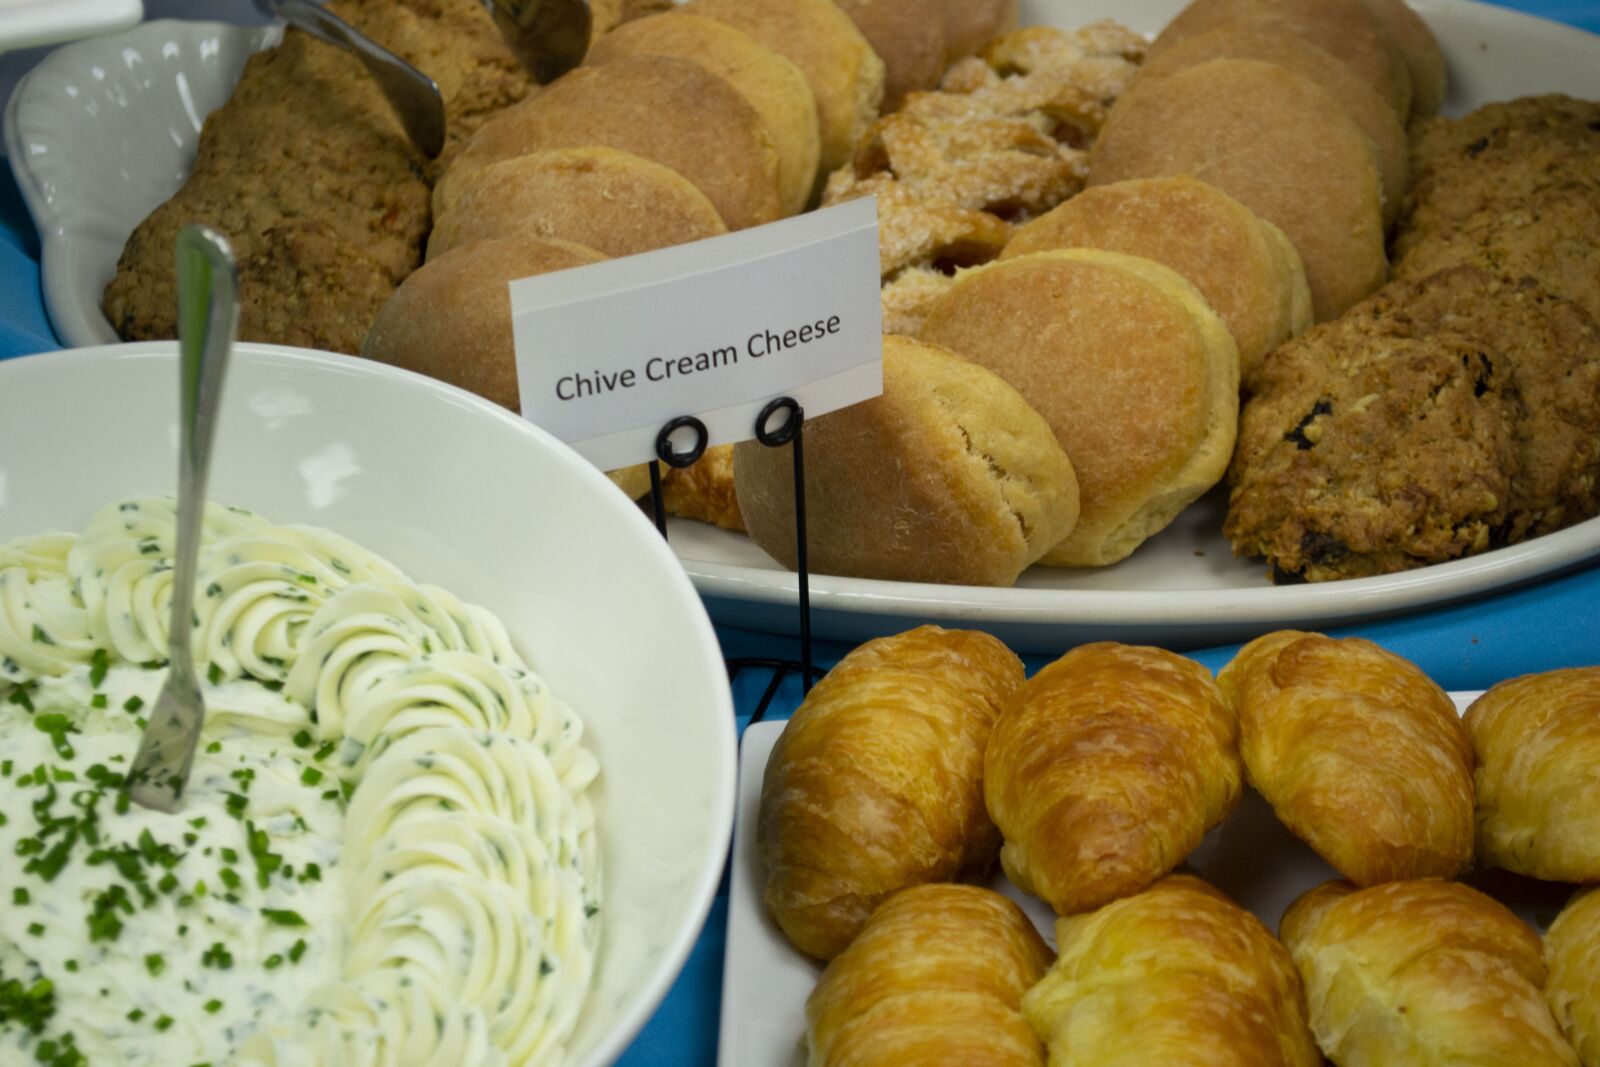 Nikon D3100 sample photo. Chive, cream cheese, croissants photography